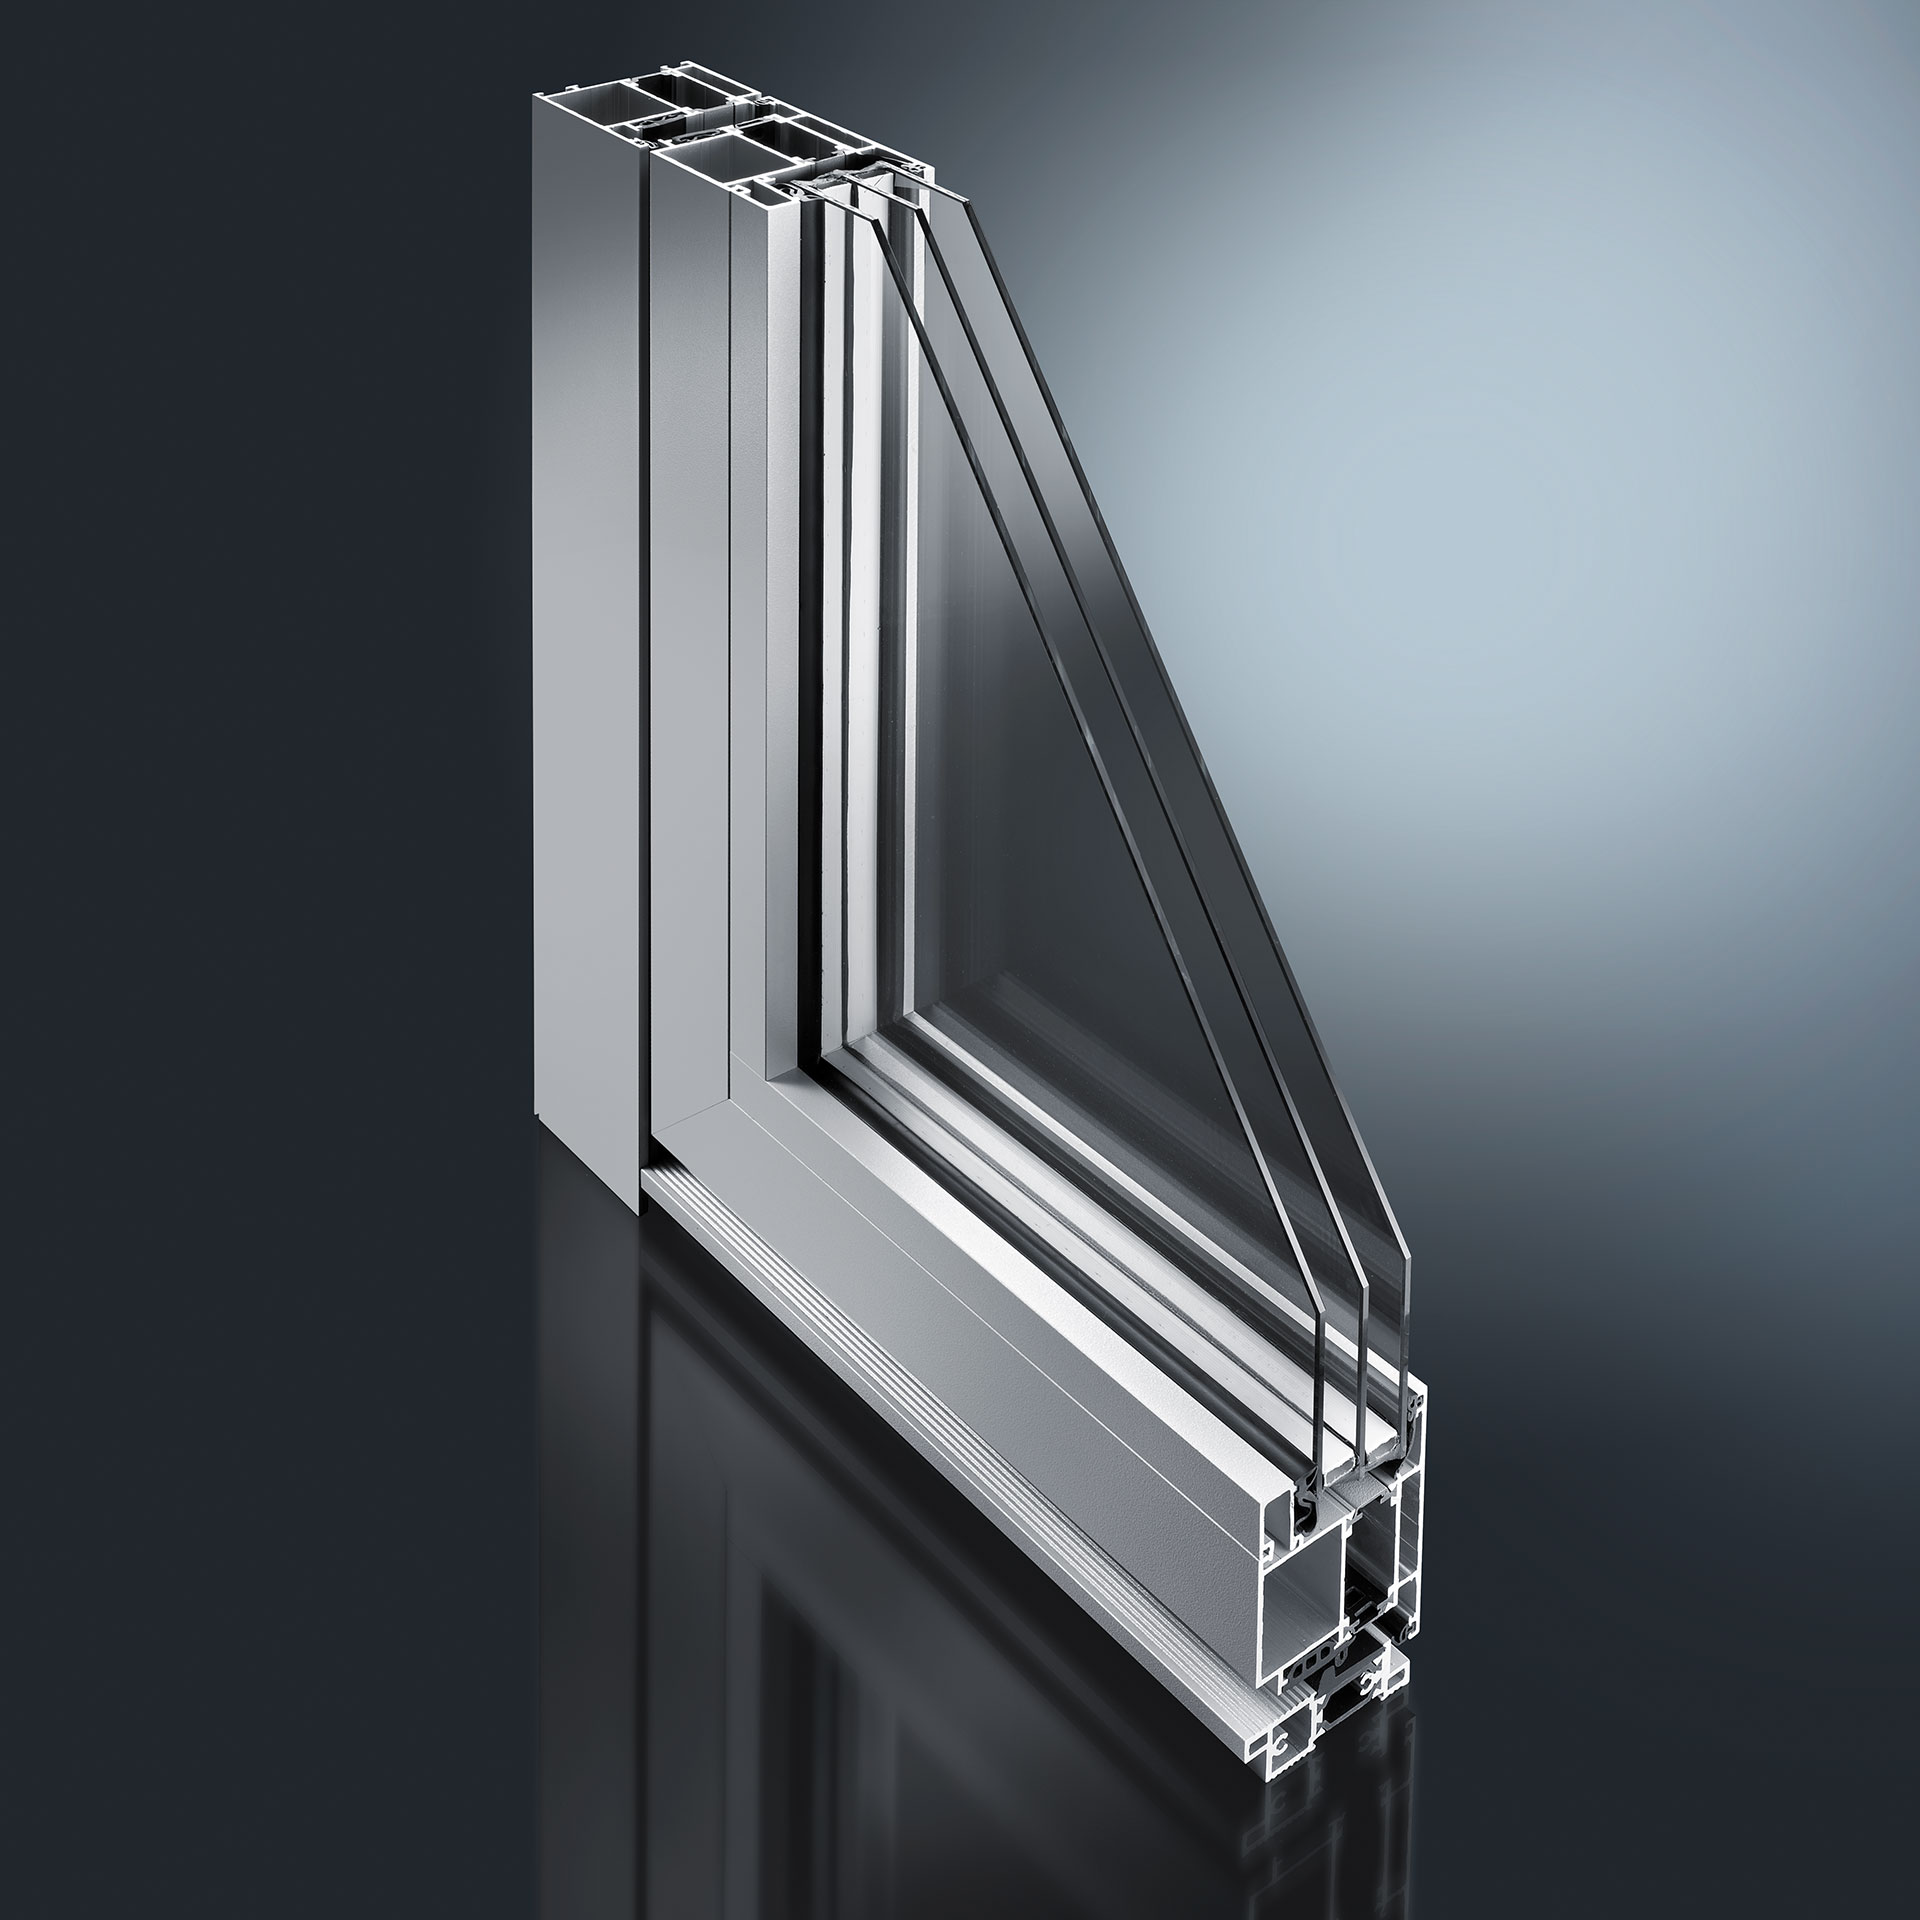 Profile systems for front doors and doors - We offer aluminium attachment shells for wood doors and modern standard models made of aluminium as well as profile system for separation and wall elements.